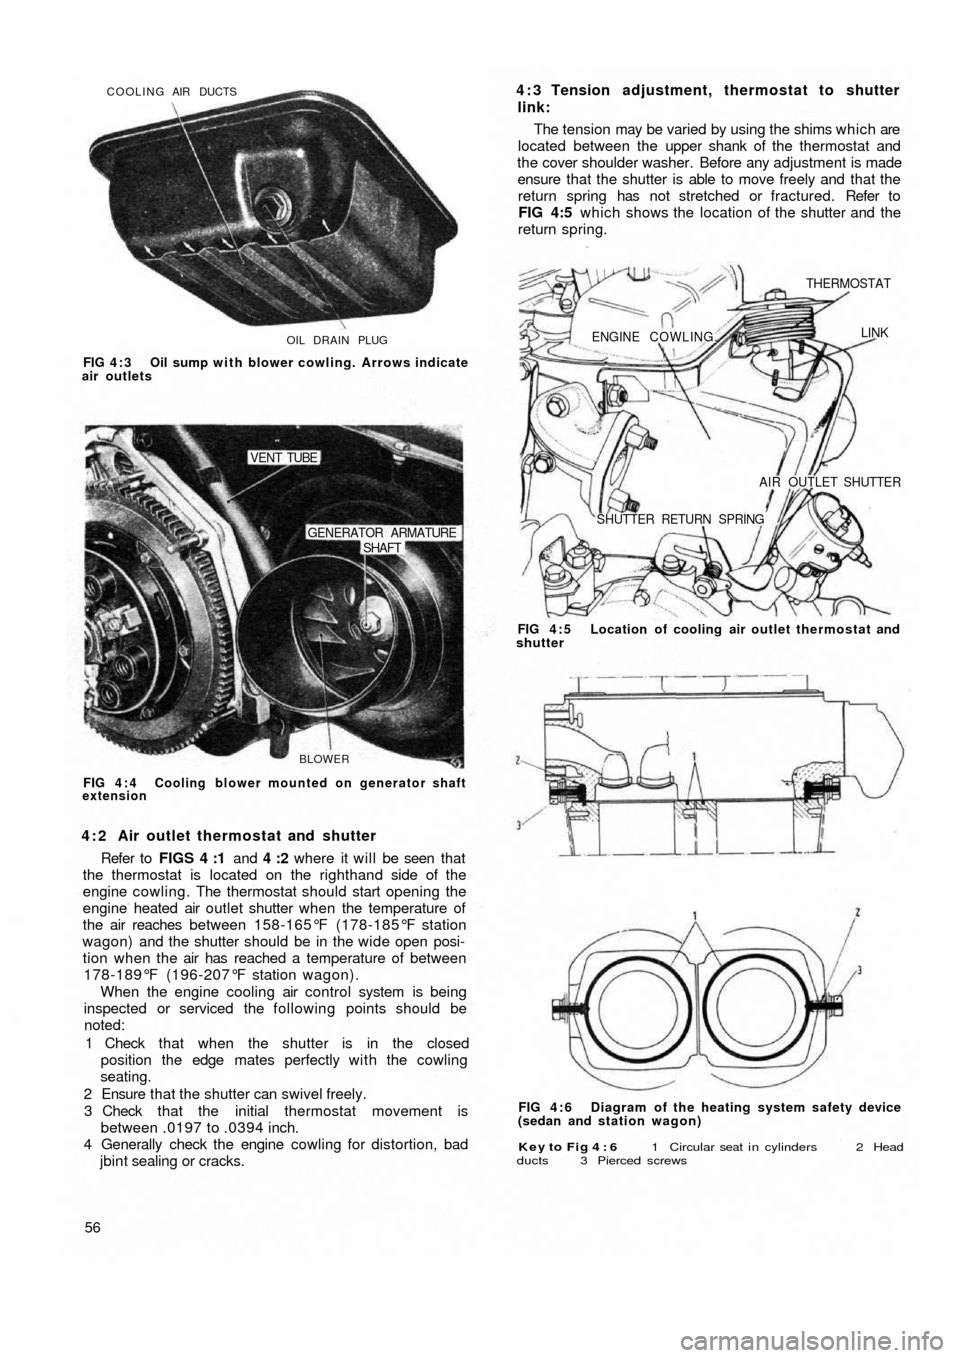 FIAT 500 1968 1.G Workshop Manual OIL DRAIN PLUG COOLING AIR DUCTS
FIG 4 : 3  Oil sump with blower cowling. Arrows indicate
air outlets
BLOWER
SHAFT GENERATOR ARMATURE
VENT TUBE
FIG 4 : 4  Cooling blower mounted on generator shaft
ext